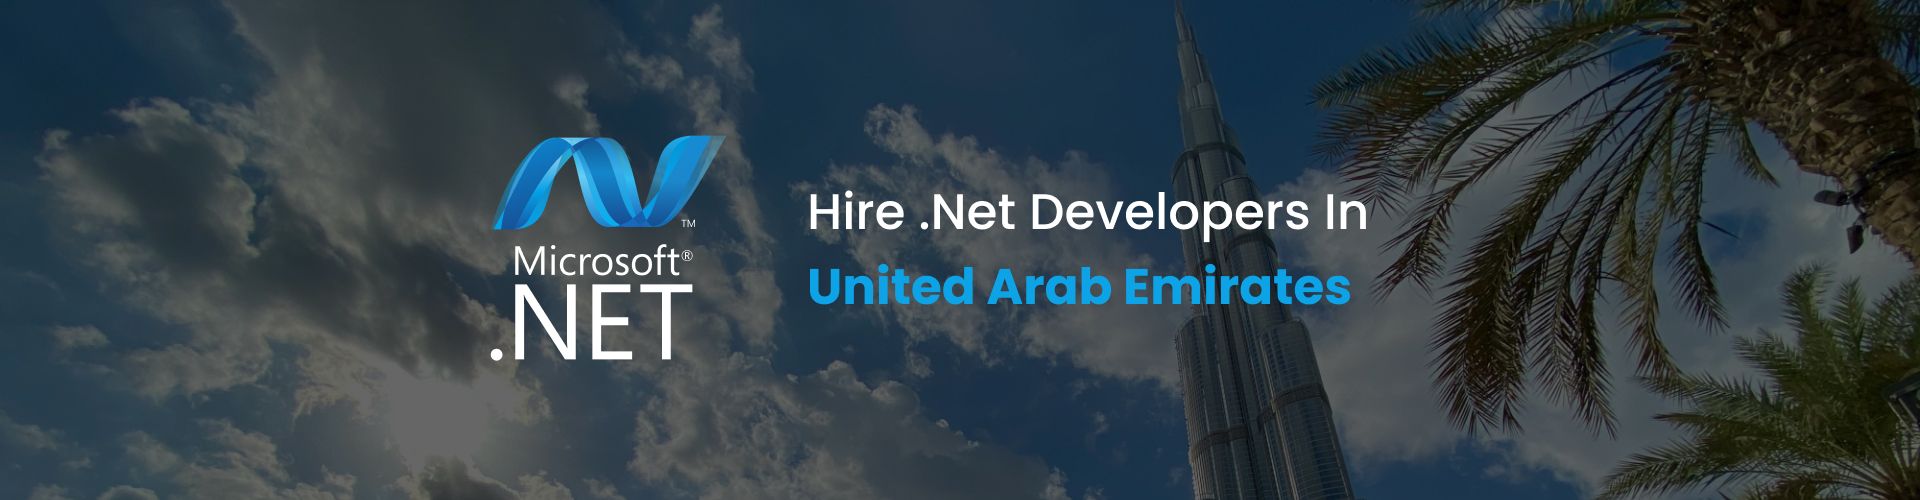 hire .net developers in united arab emirates